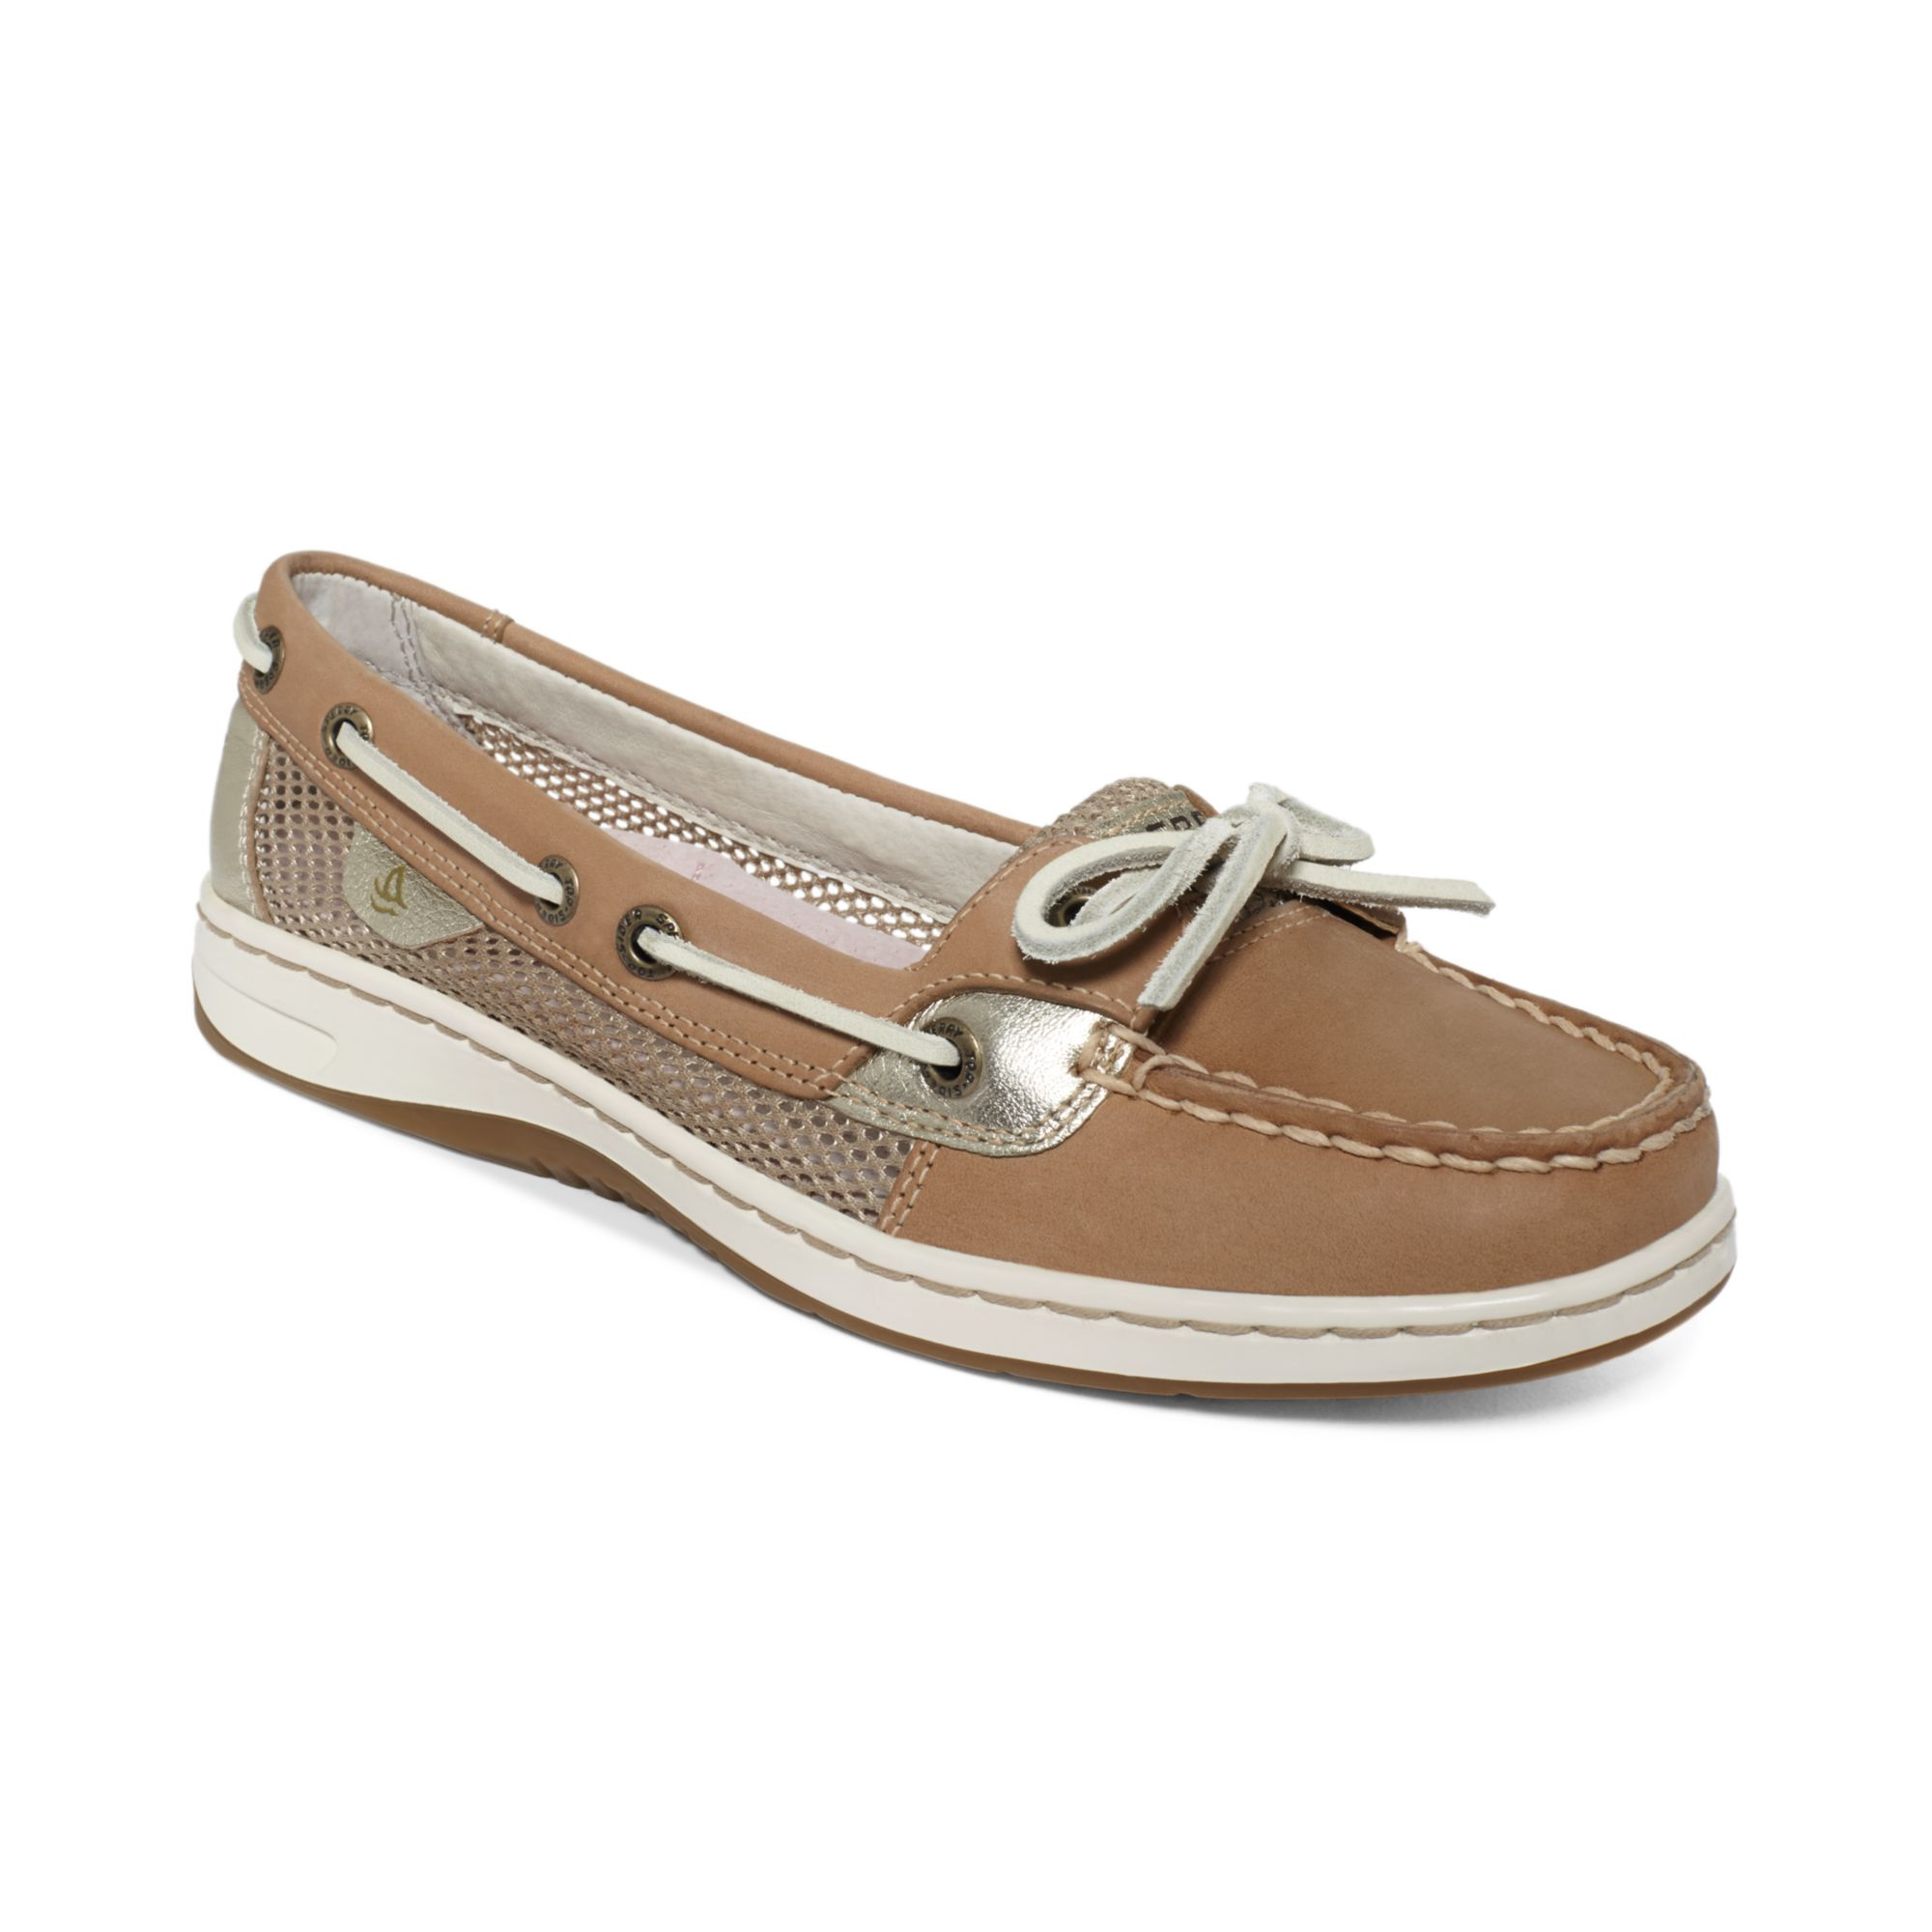 Sperry Top Sider Shoes Women